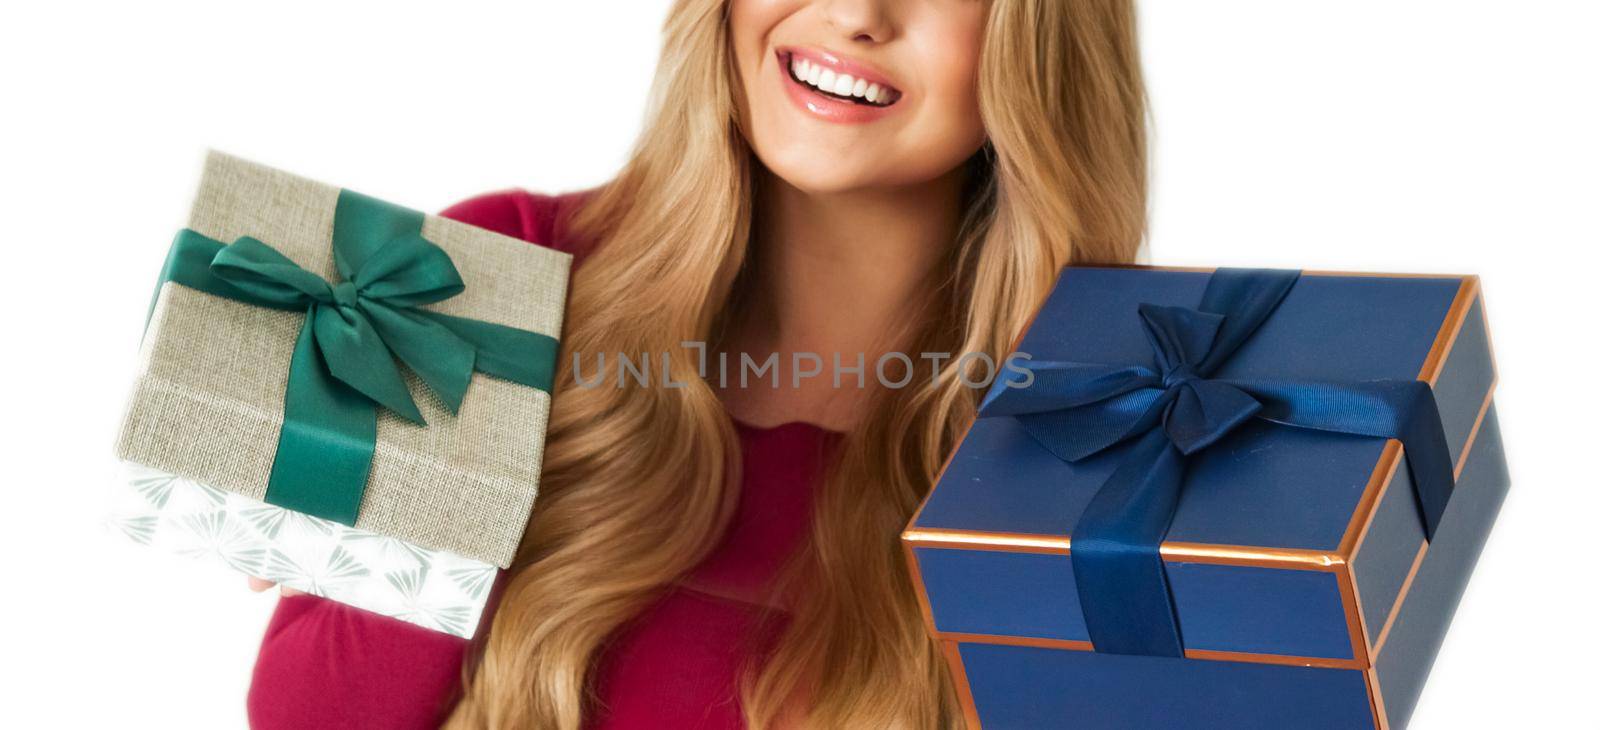 Birthday, Christmas gifts or holiday present, happy woman holding gift boxes isolated on white background, portrait